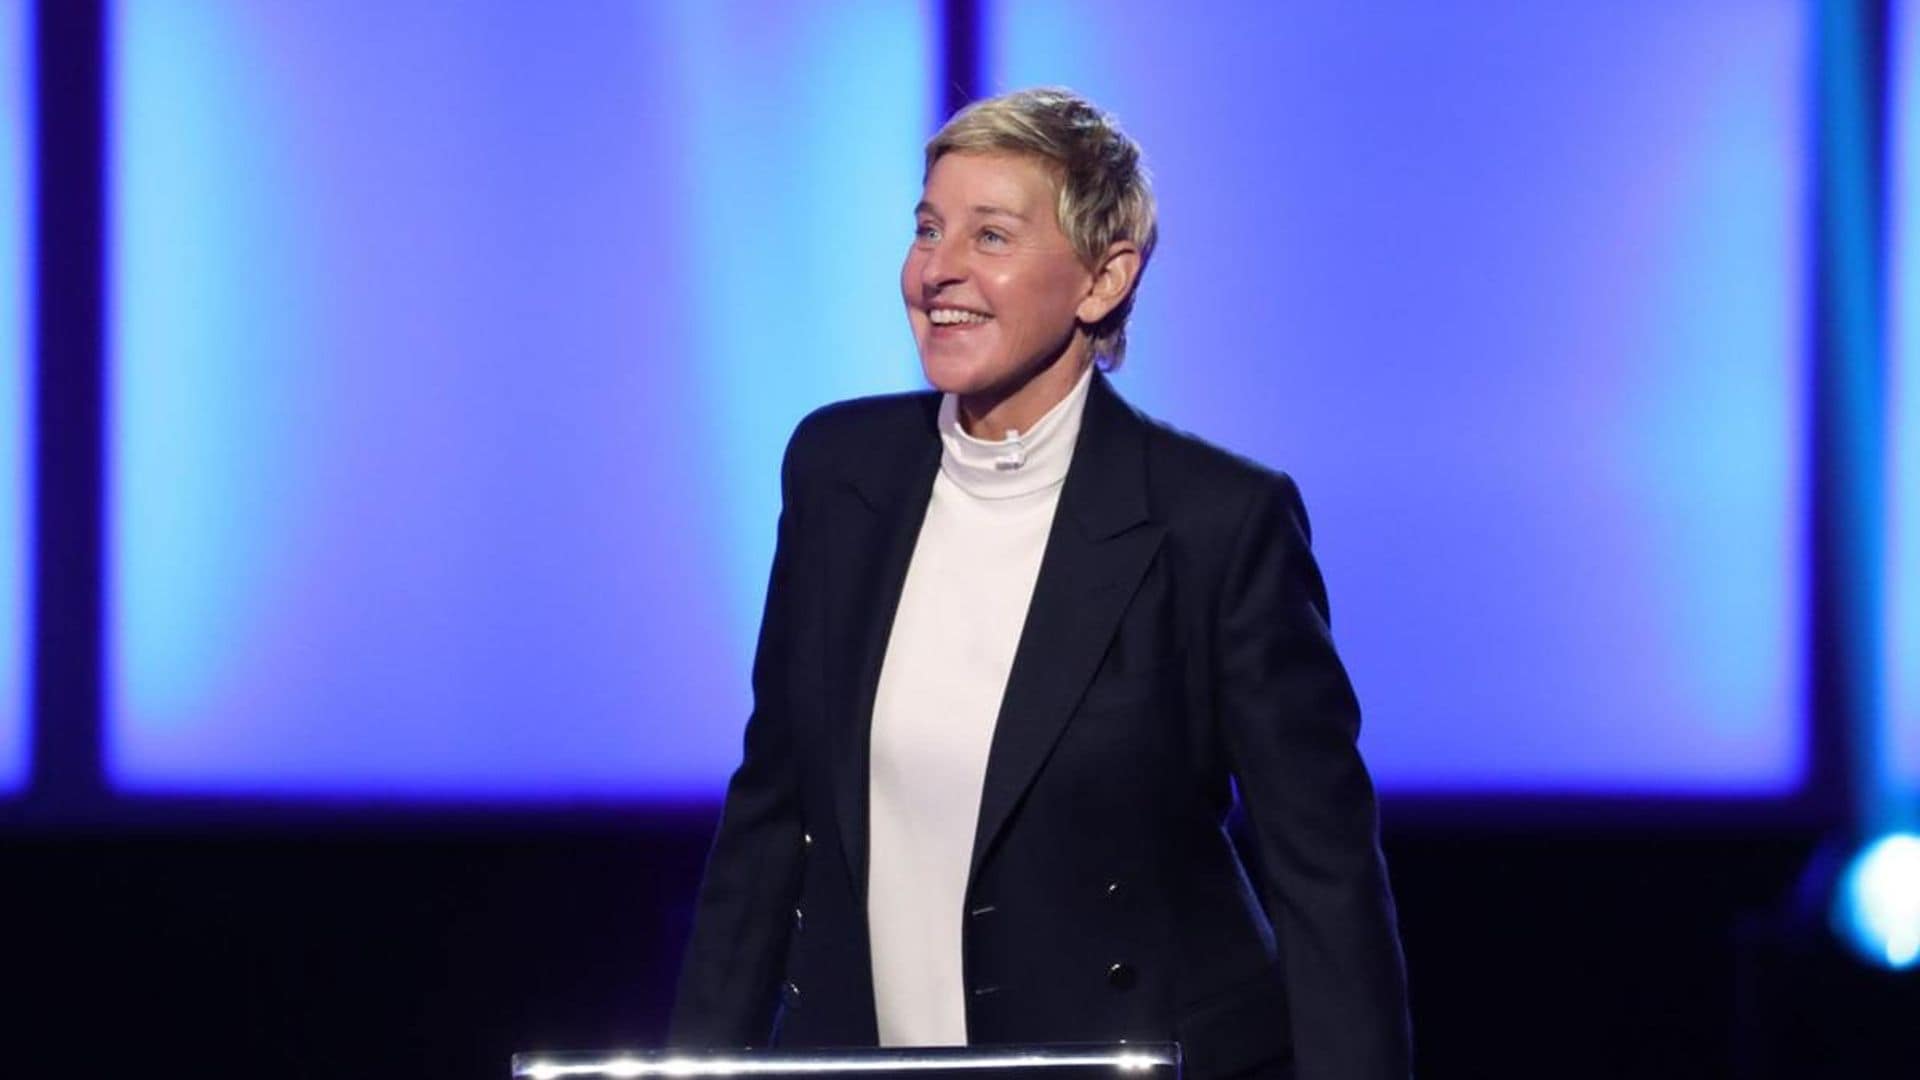 Ellen DeGeneres is disappearing from the public eye after Netflix special: 'I'm done with fame'